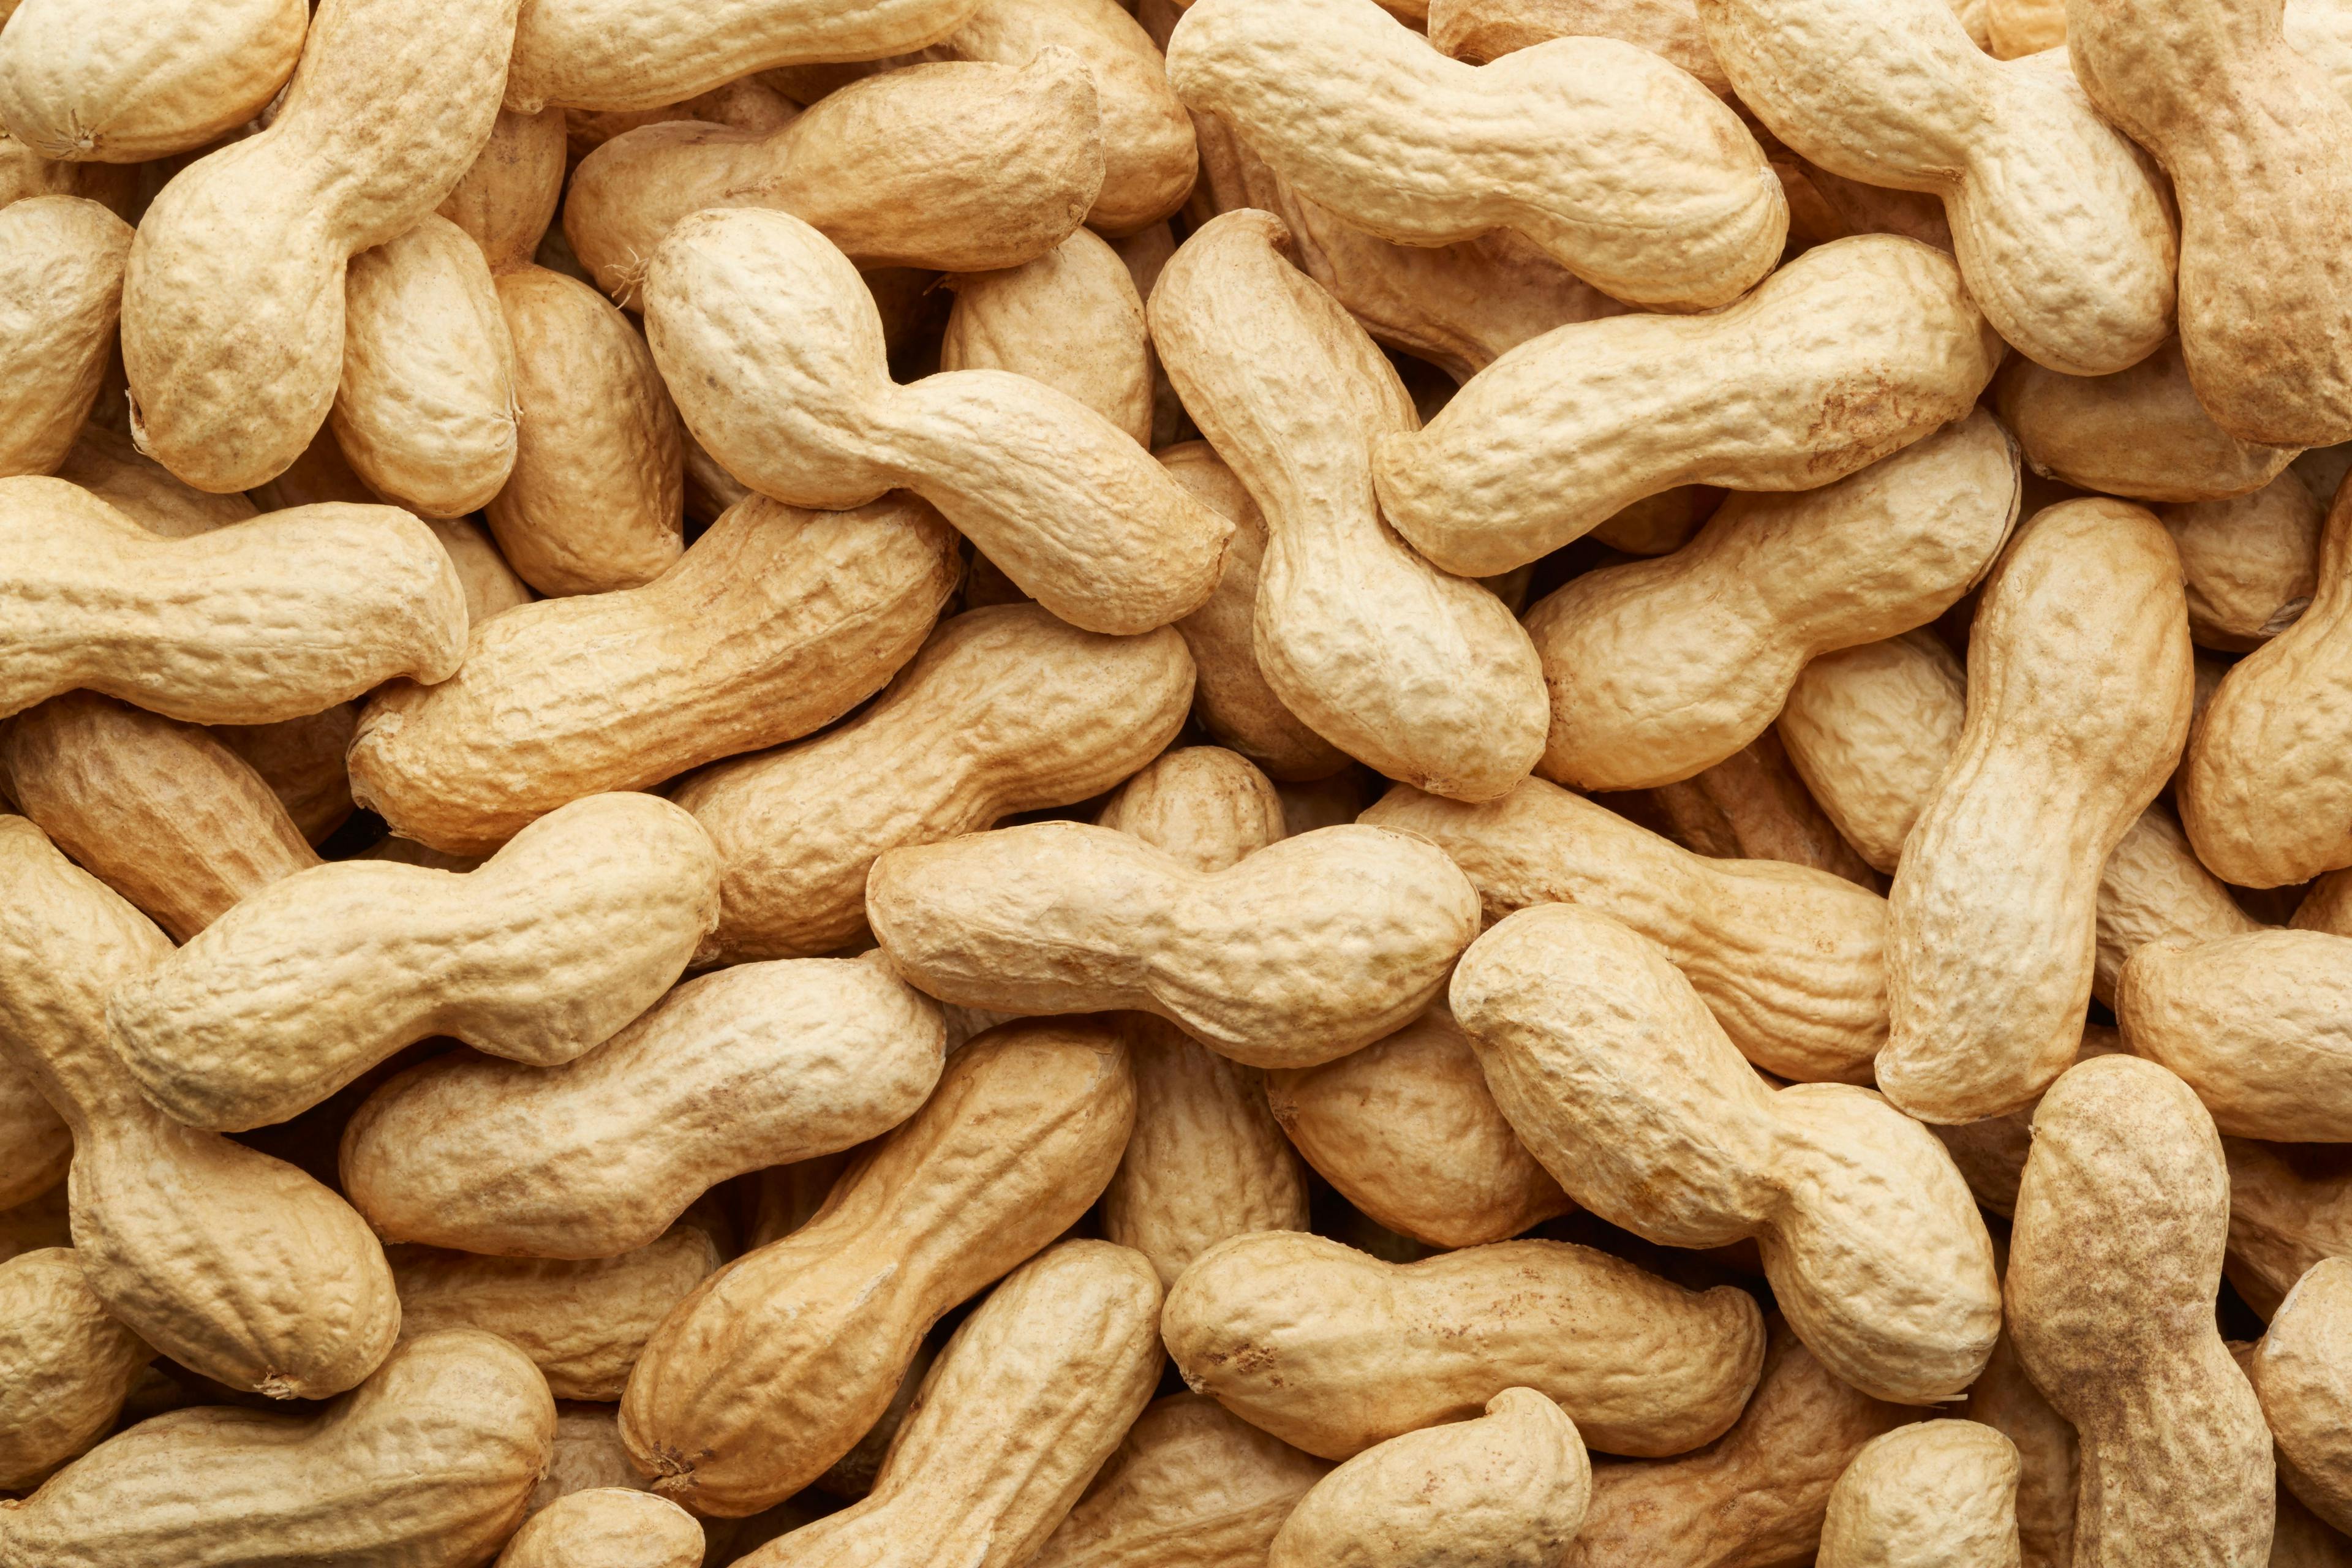 Peanuts in shell texture background | Image Credit: © andersphoto - stock.adobe.com